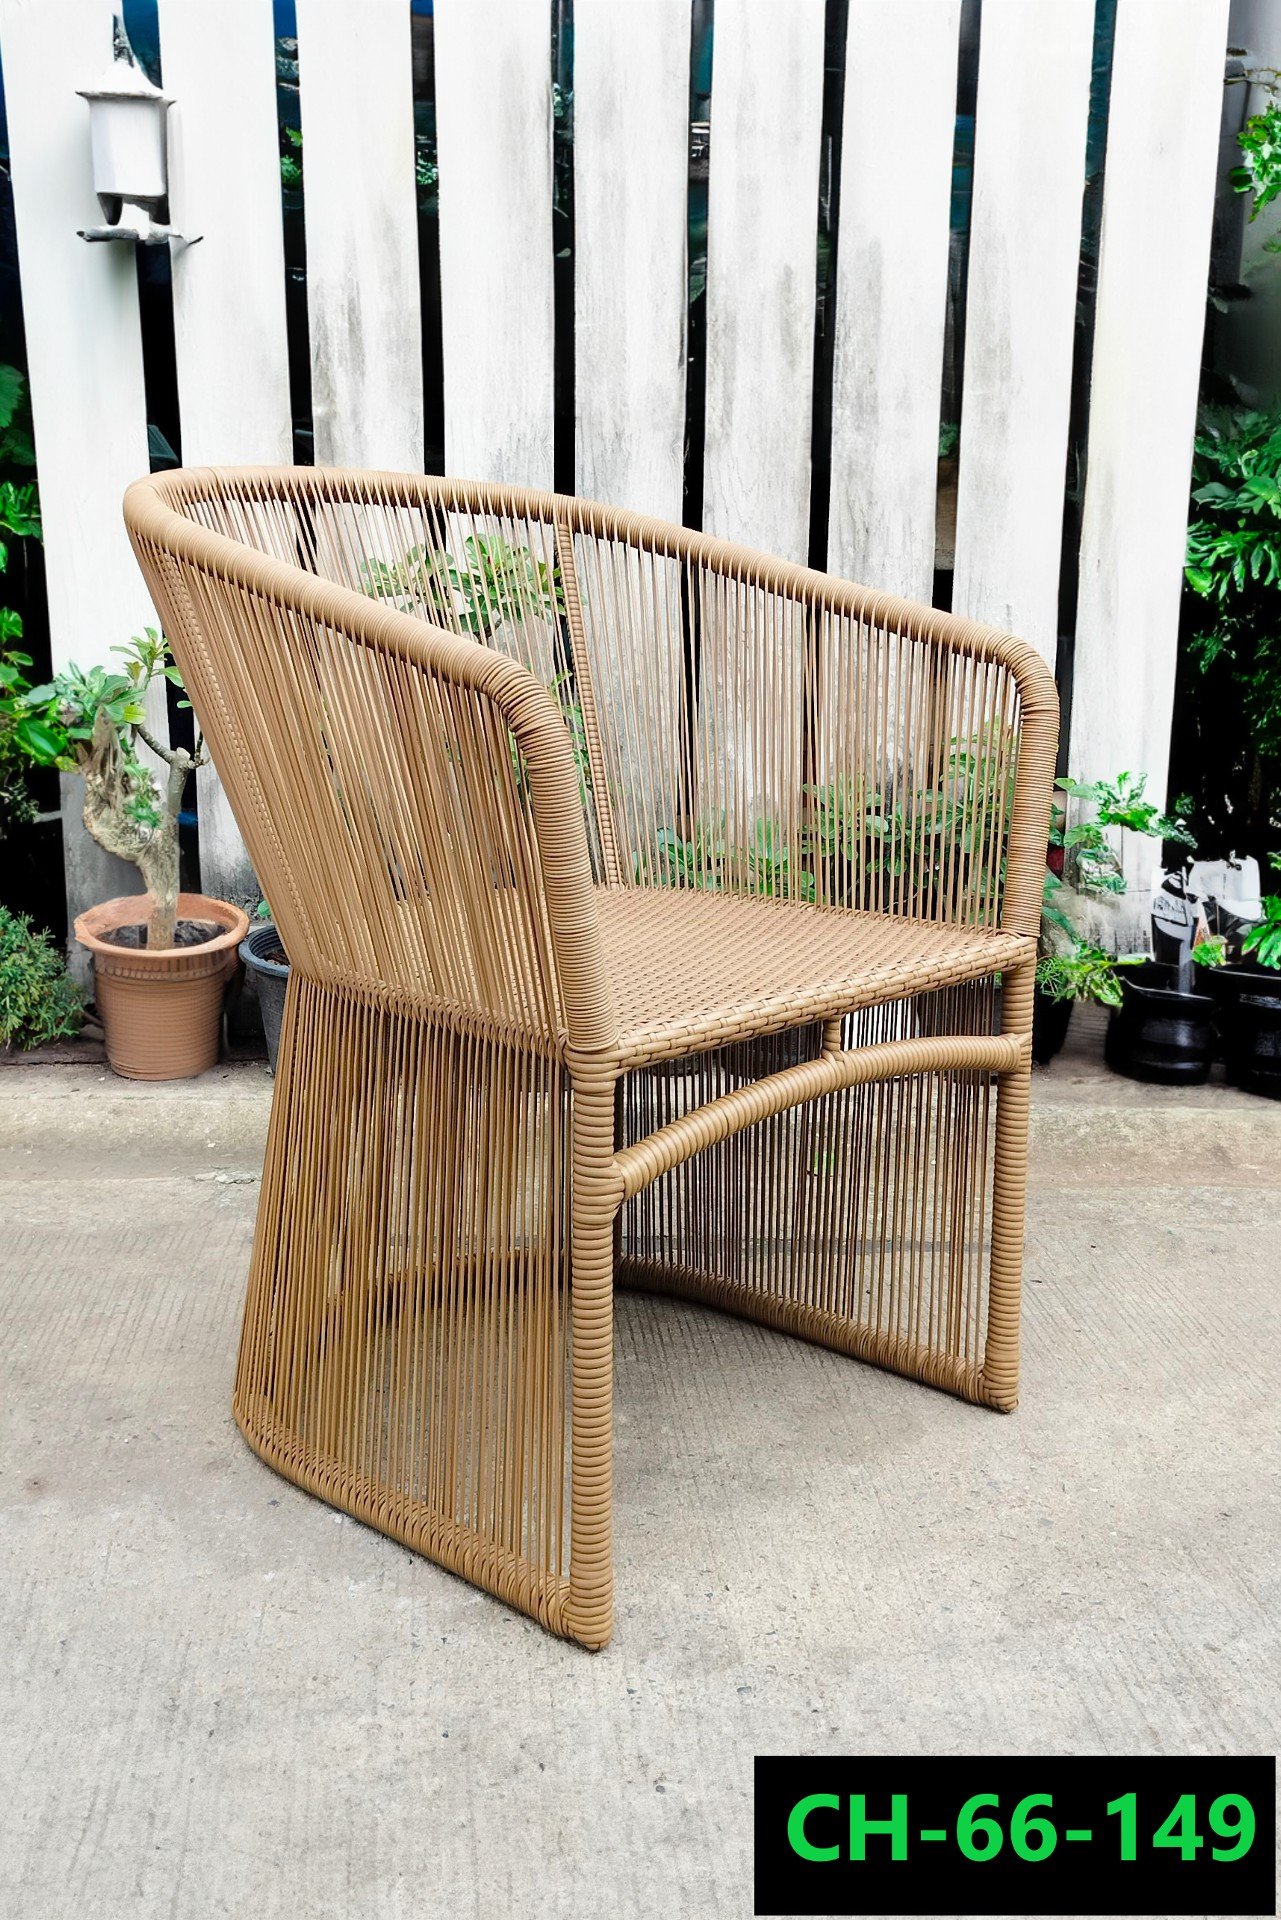 Rattan Chair set Product code CH-66-149